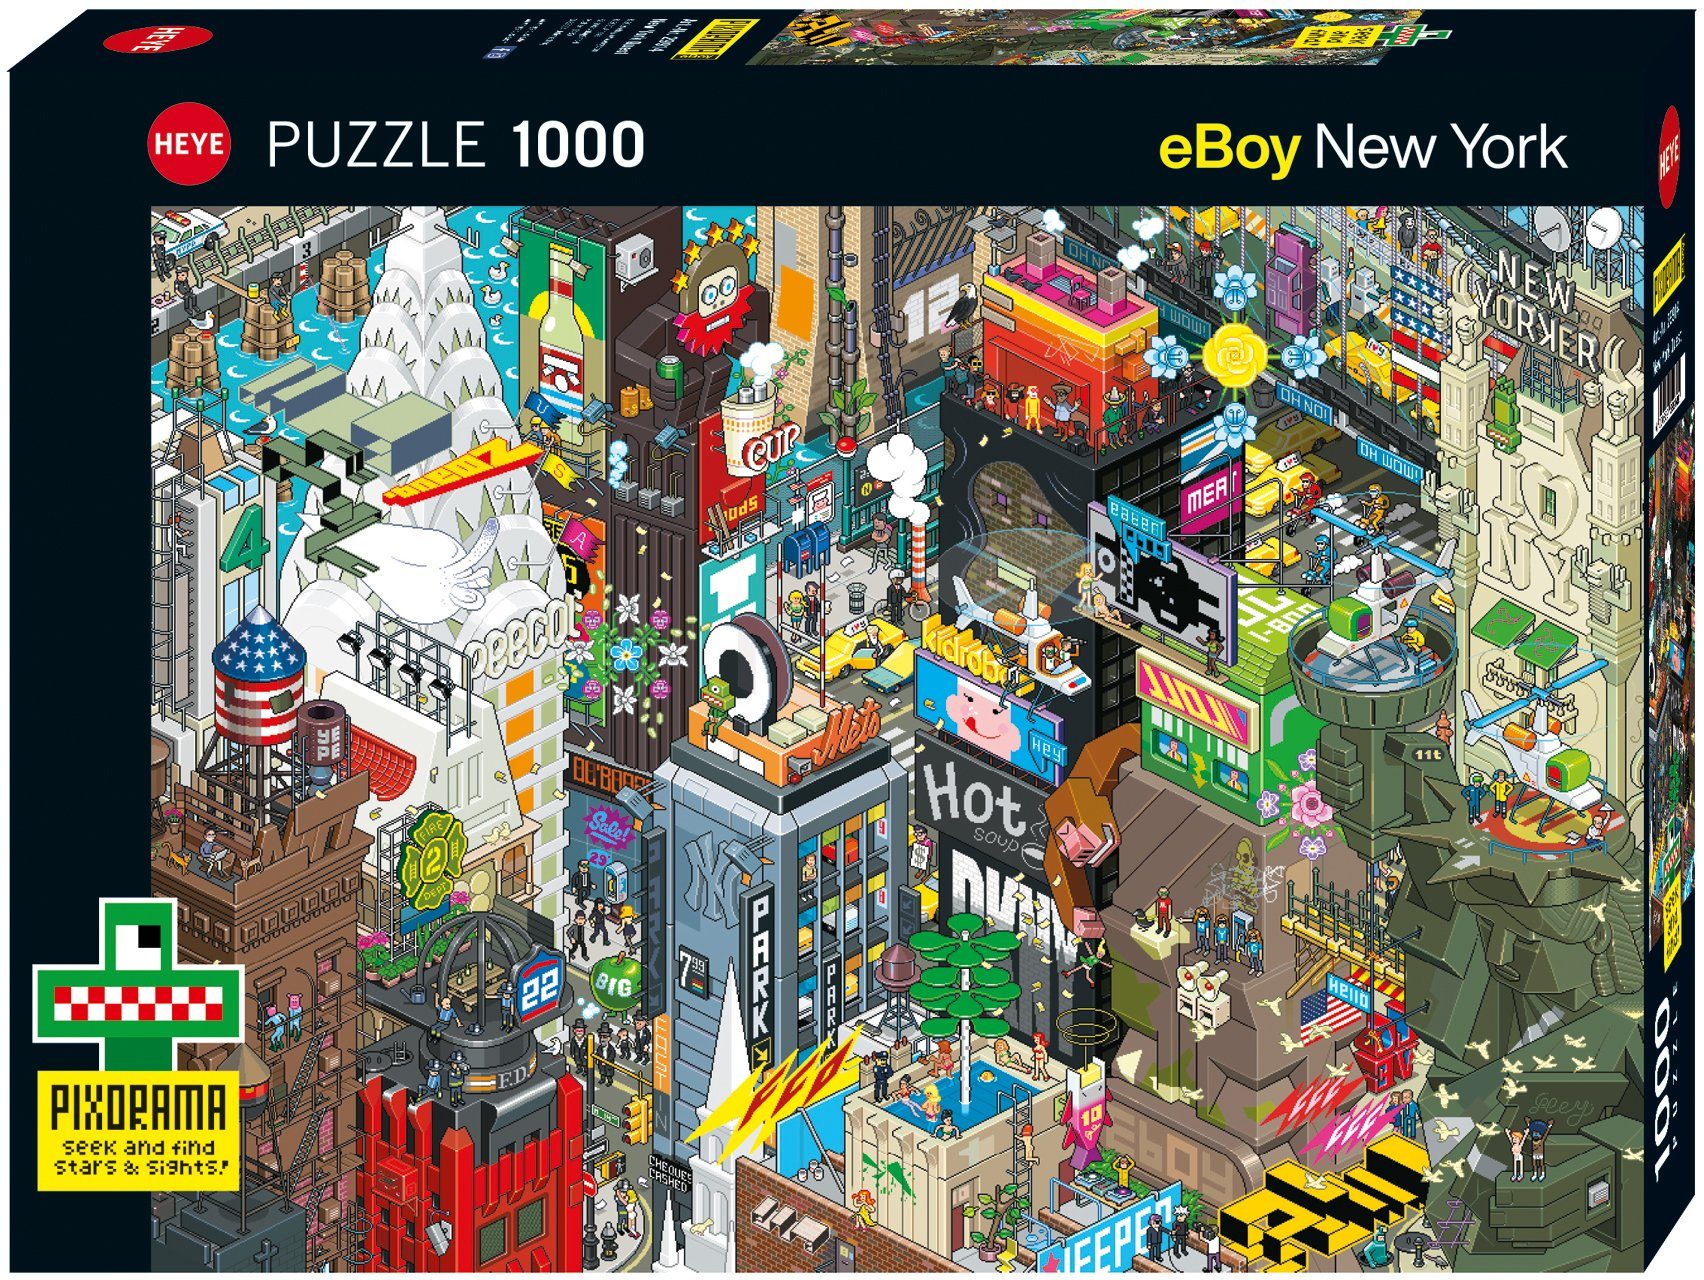 York in 1000 HEYE Puzzleteile, Made Quest, Puzzle New Germany